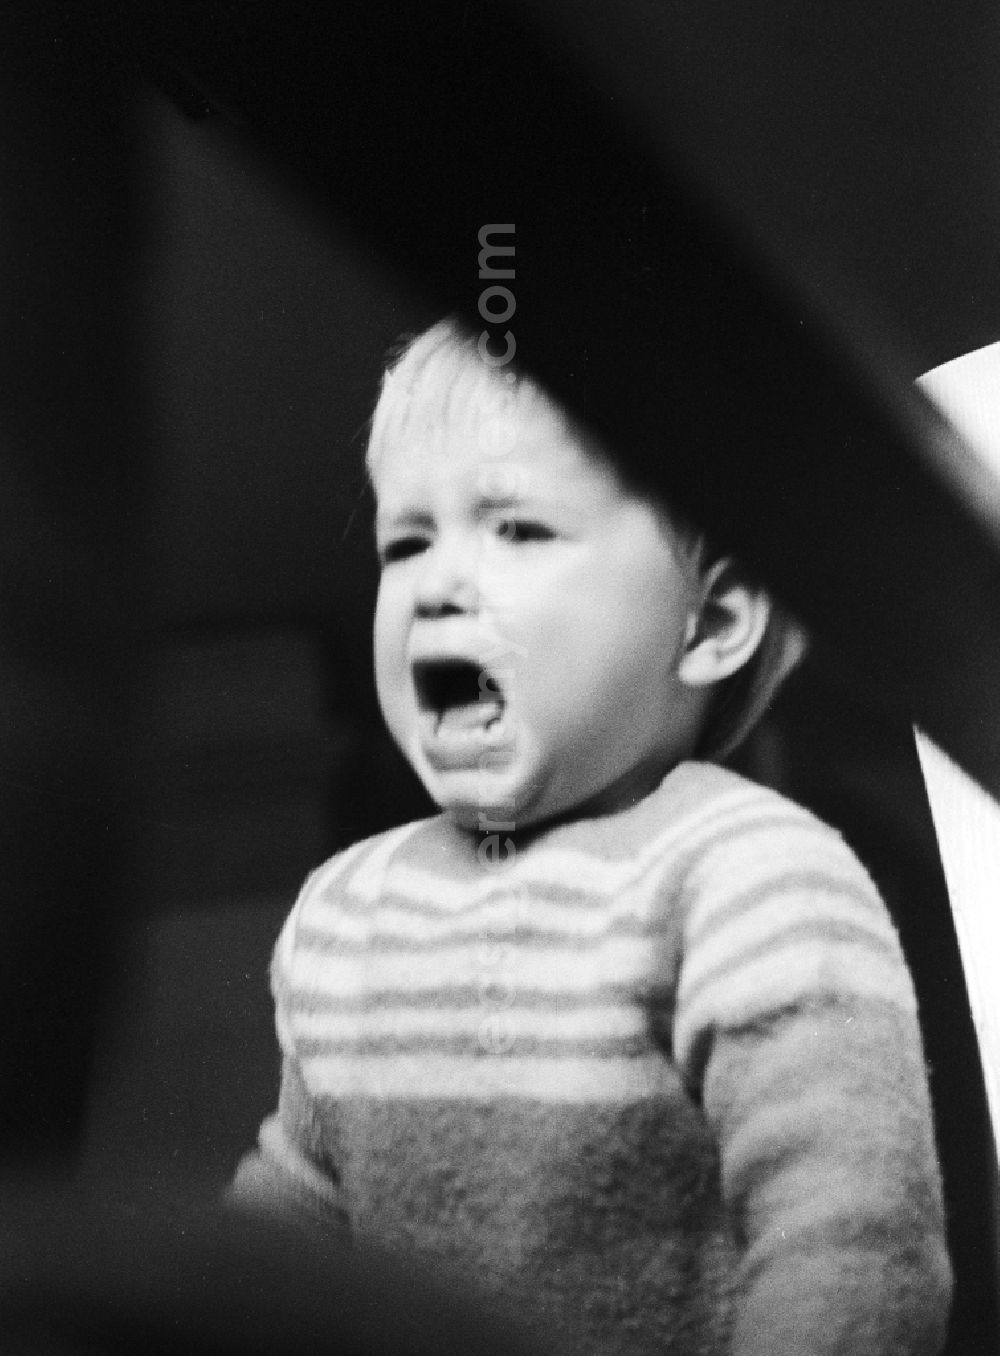 GDR picture archive: Berlin - Little crying child in Berlin, the former capital of the GDR, German Democratic Republic